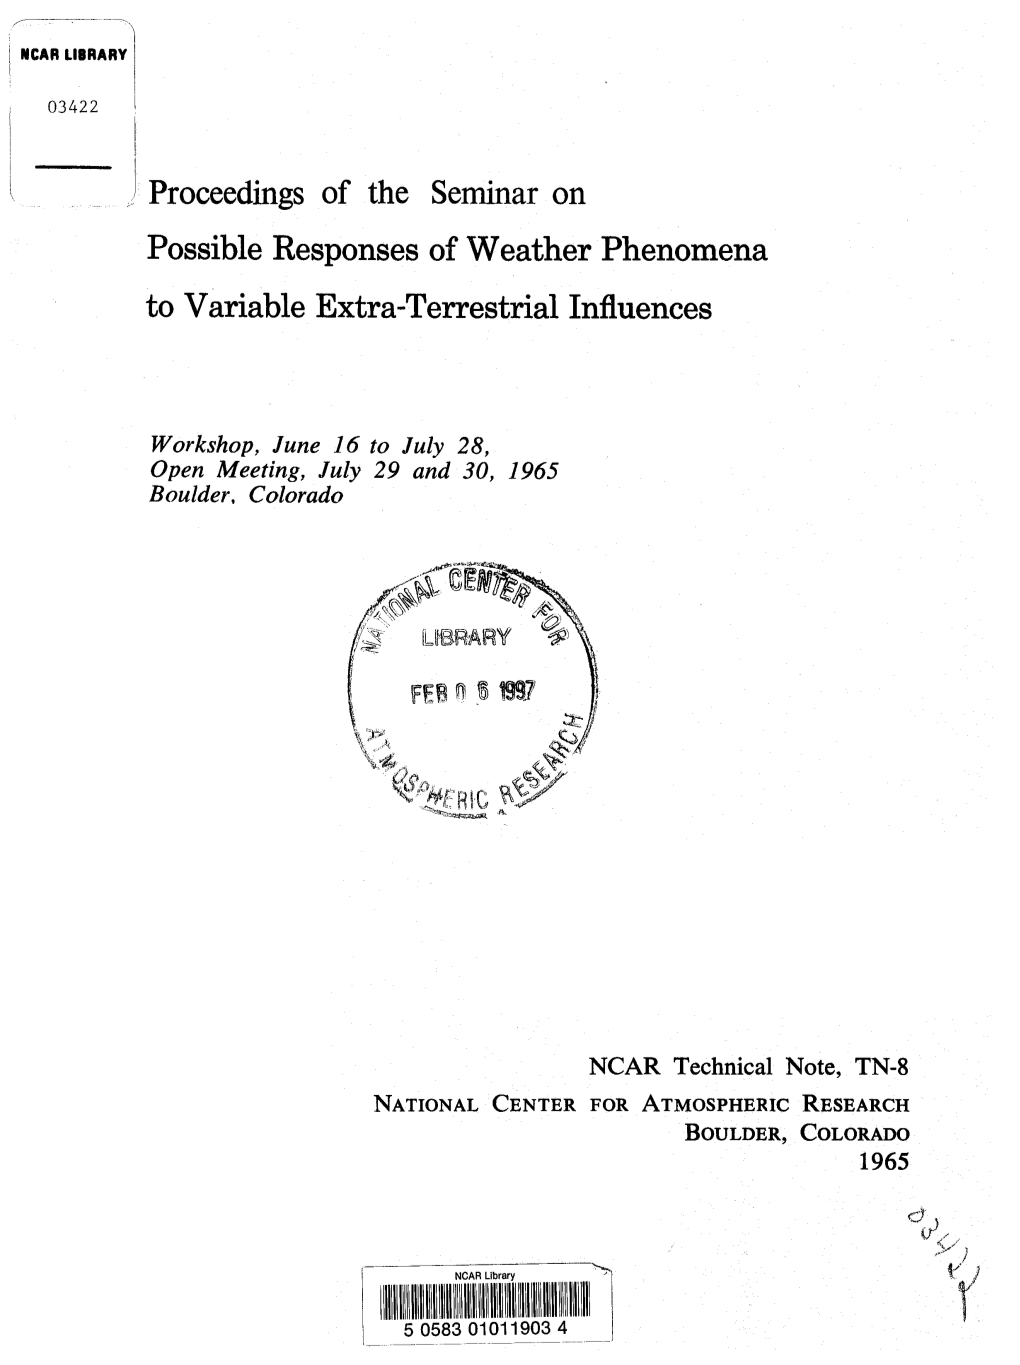 Part 1 Seminar on Possible Responses of Weather Phenomena to Variable